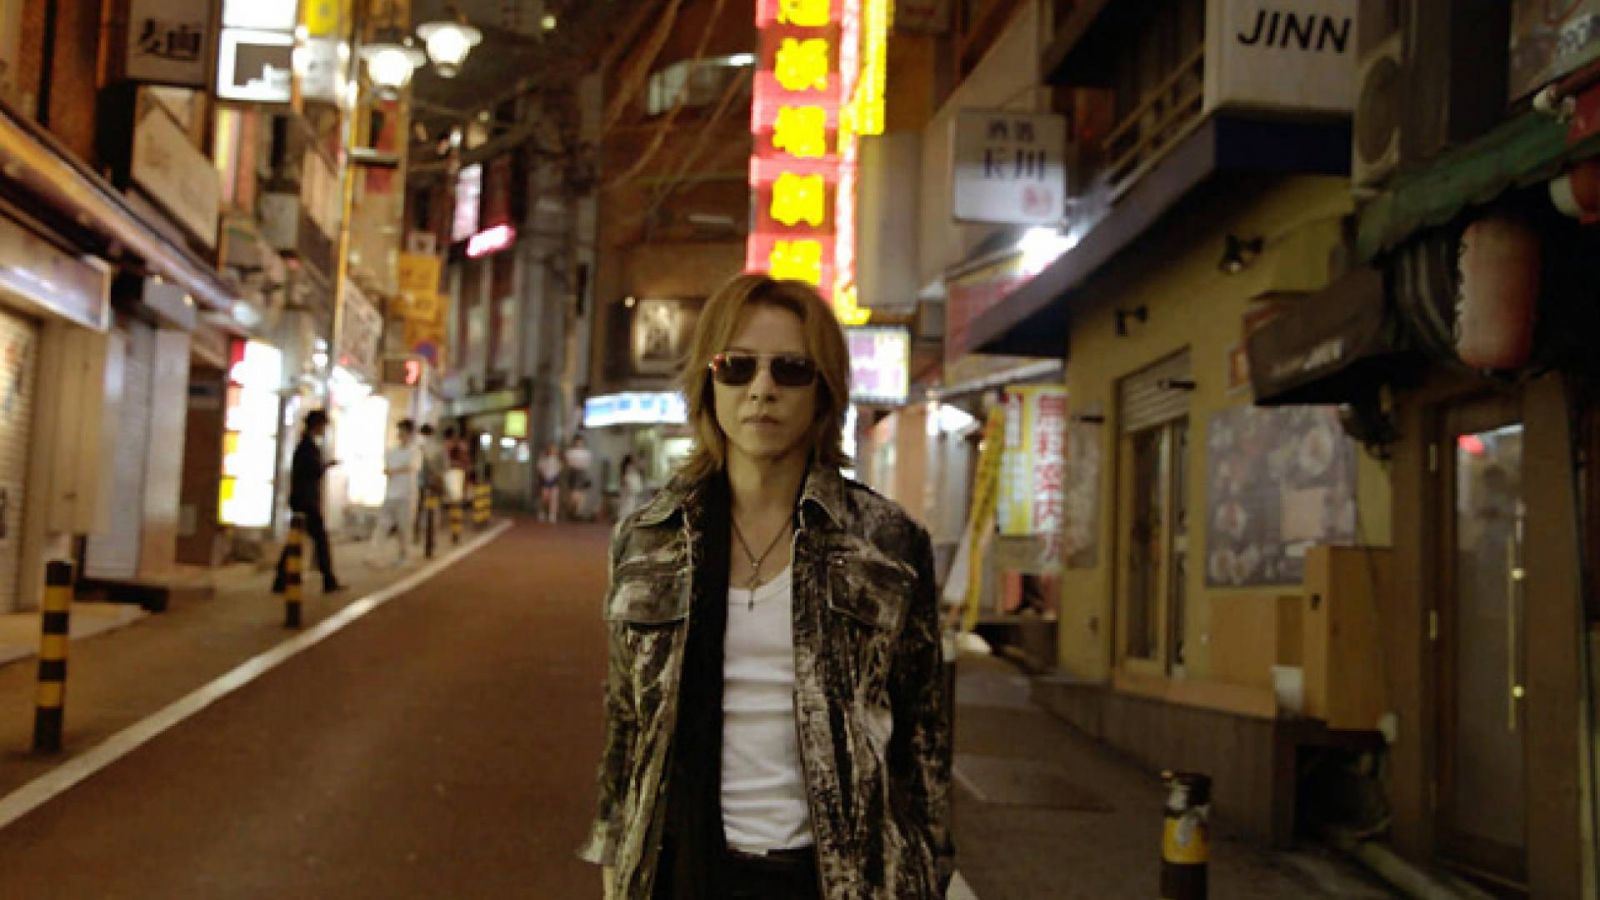 YOSHIKI to Perform Live At "We Are X" Film Event in San Francisco © YOSHIKI